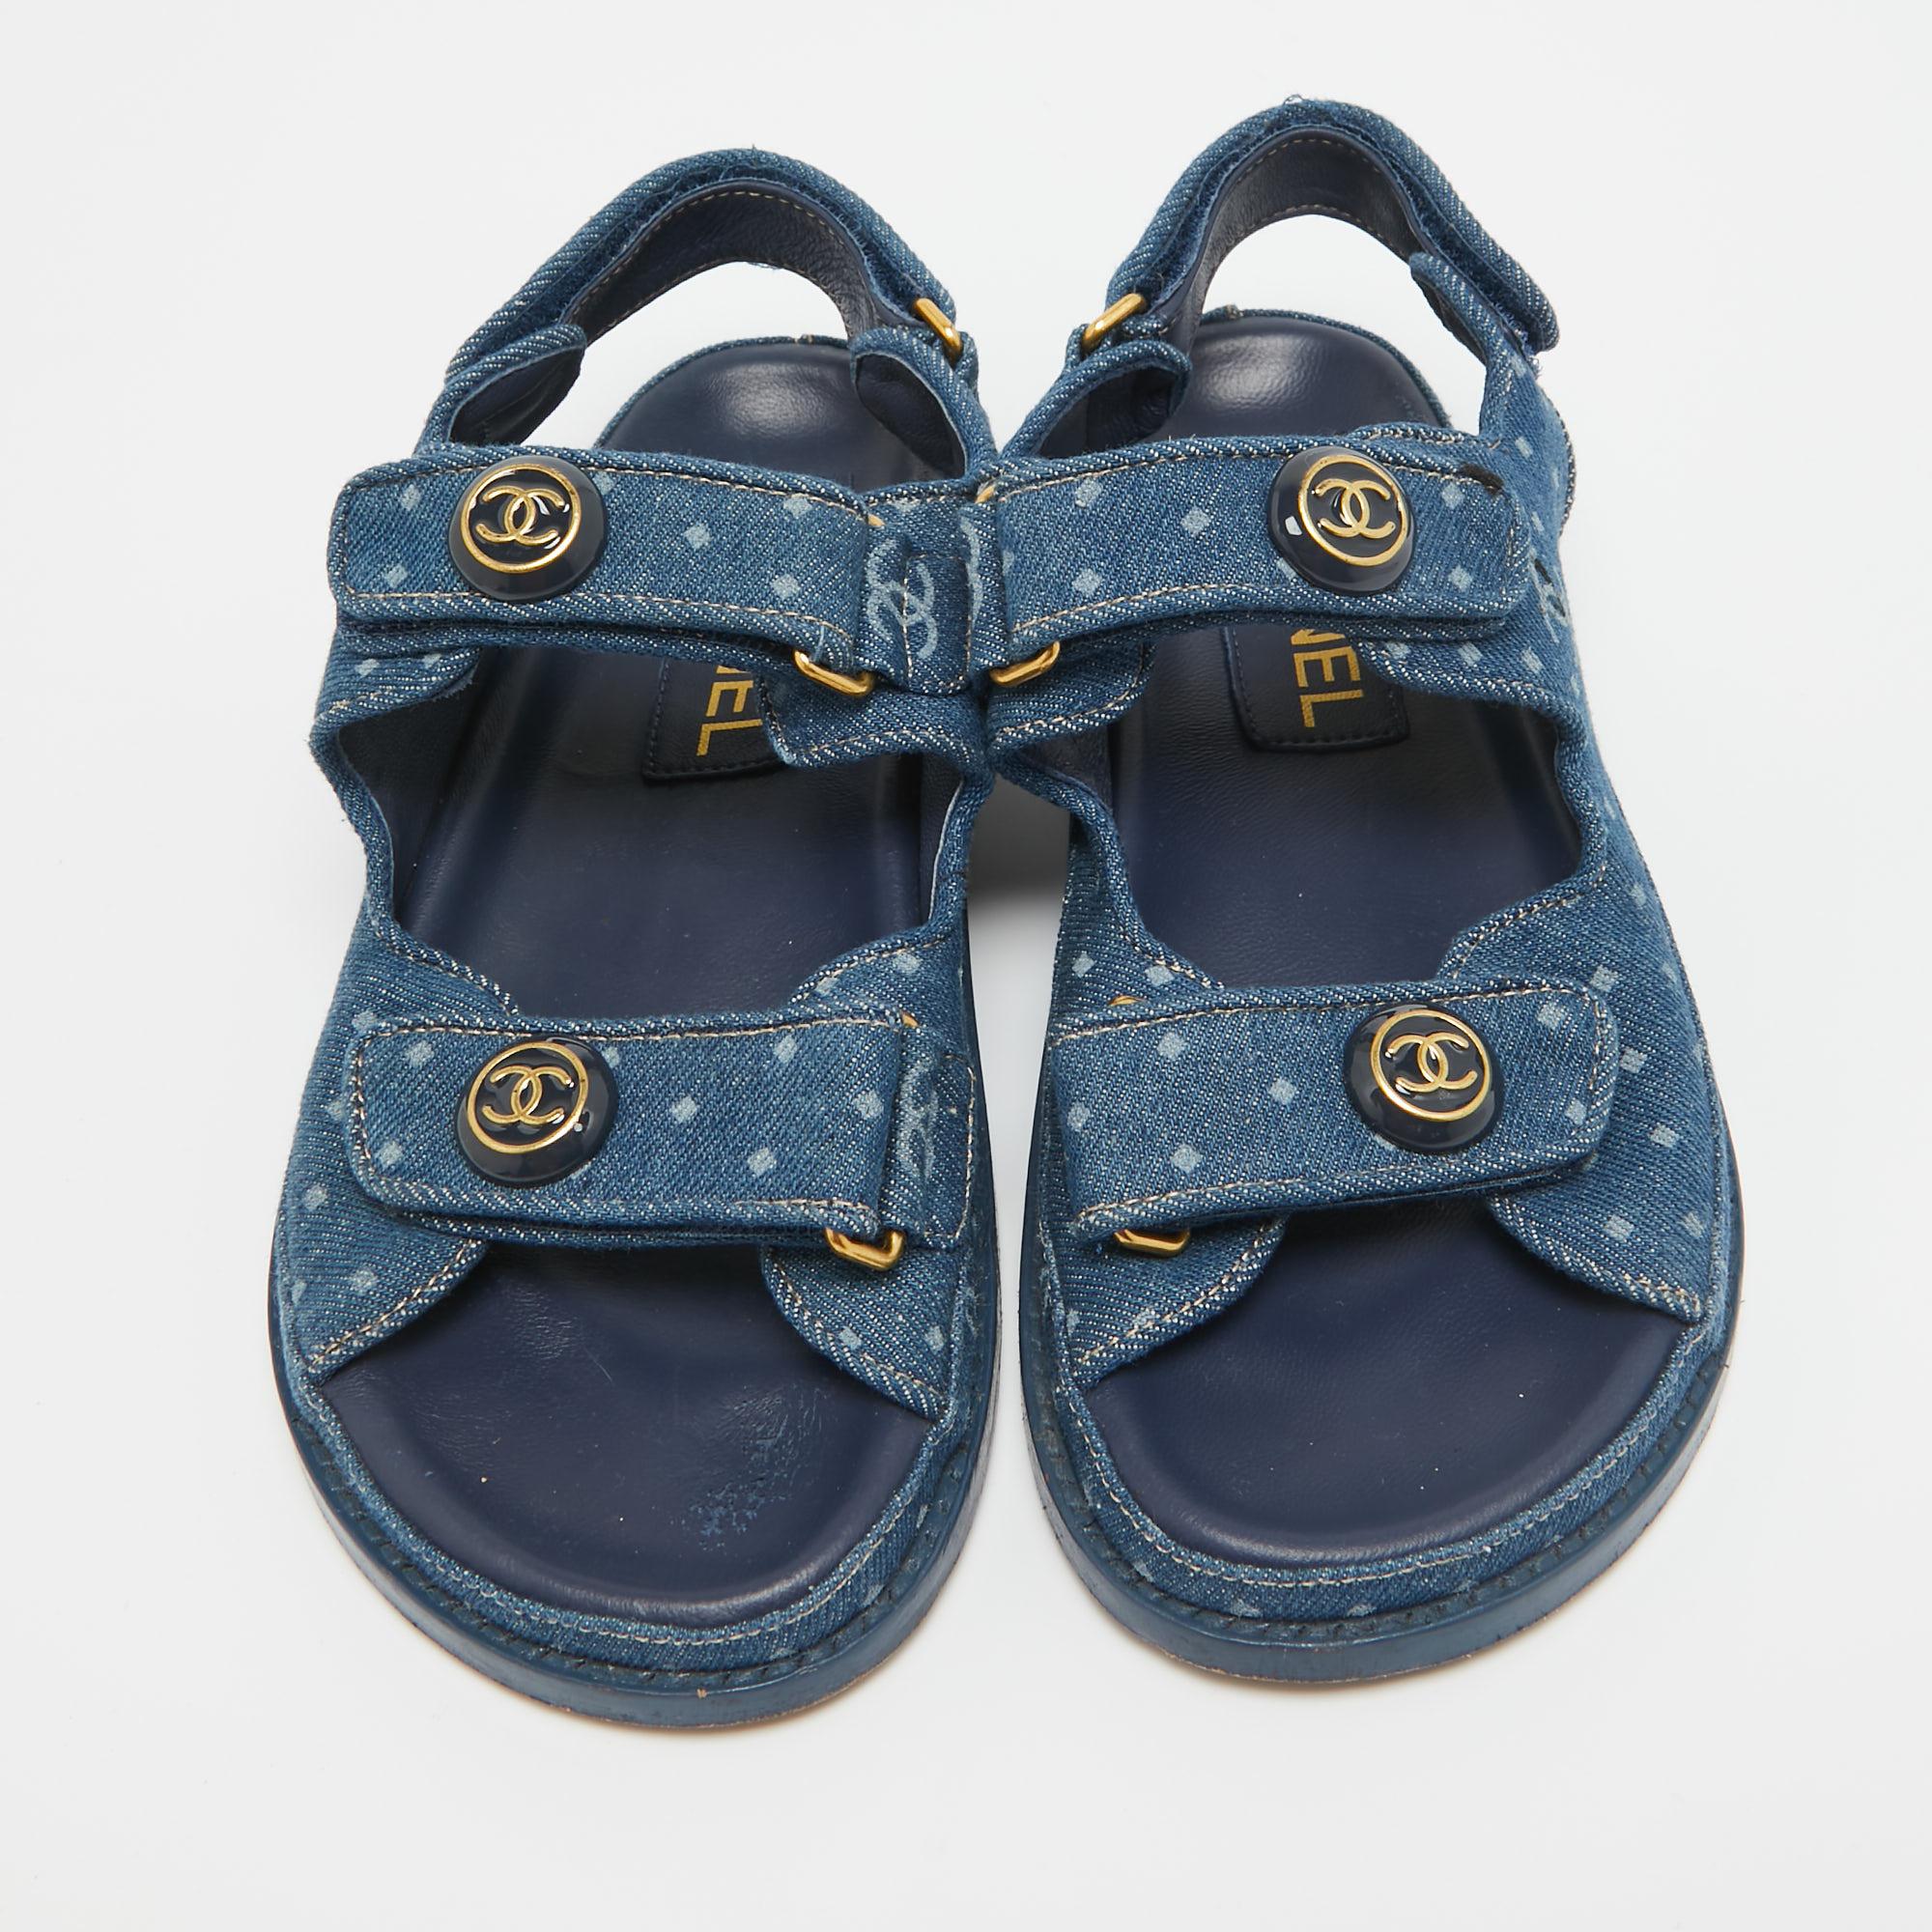 Wonderfully crafted shoes added with notable elements to fit well and pair perfectly with all your plans. Make these Chanel Dad sandals yours today!

